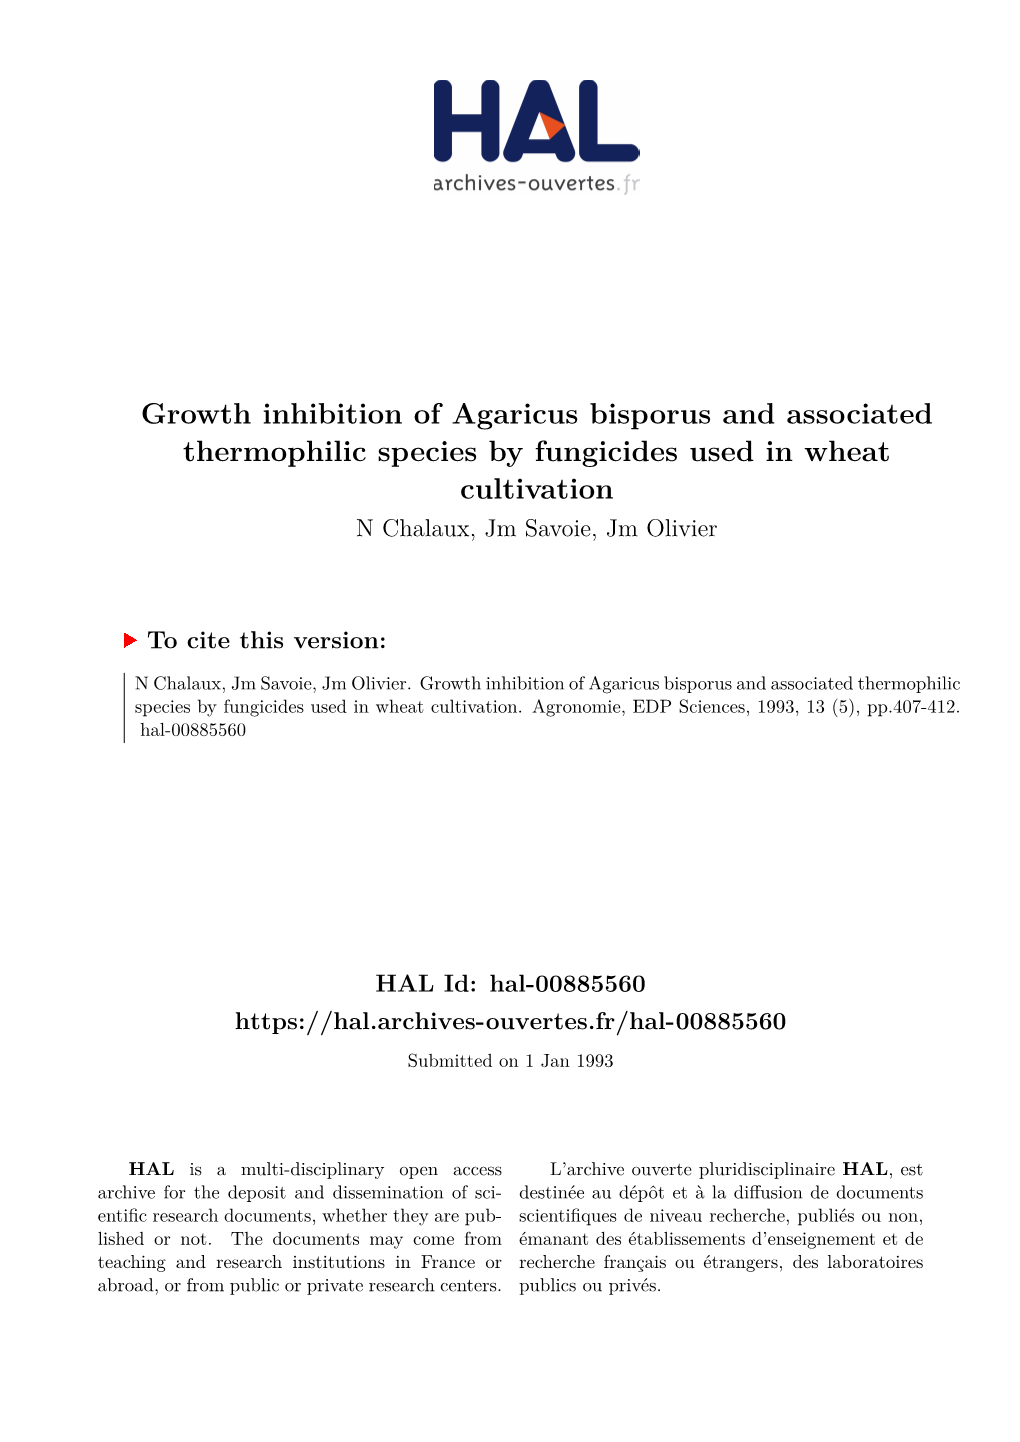 Growth Inhibition of Agaricus Bisporus and Associated Thermophilic Species by Fungicides Used in Wheat Cultivation N Chalaux, Jm Savoie, Jm Olivier